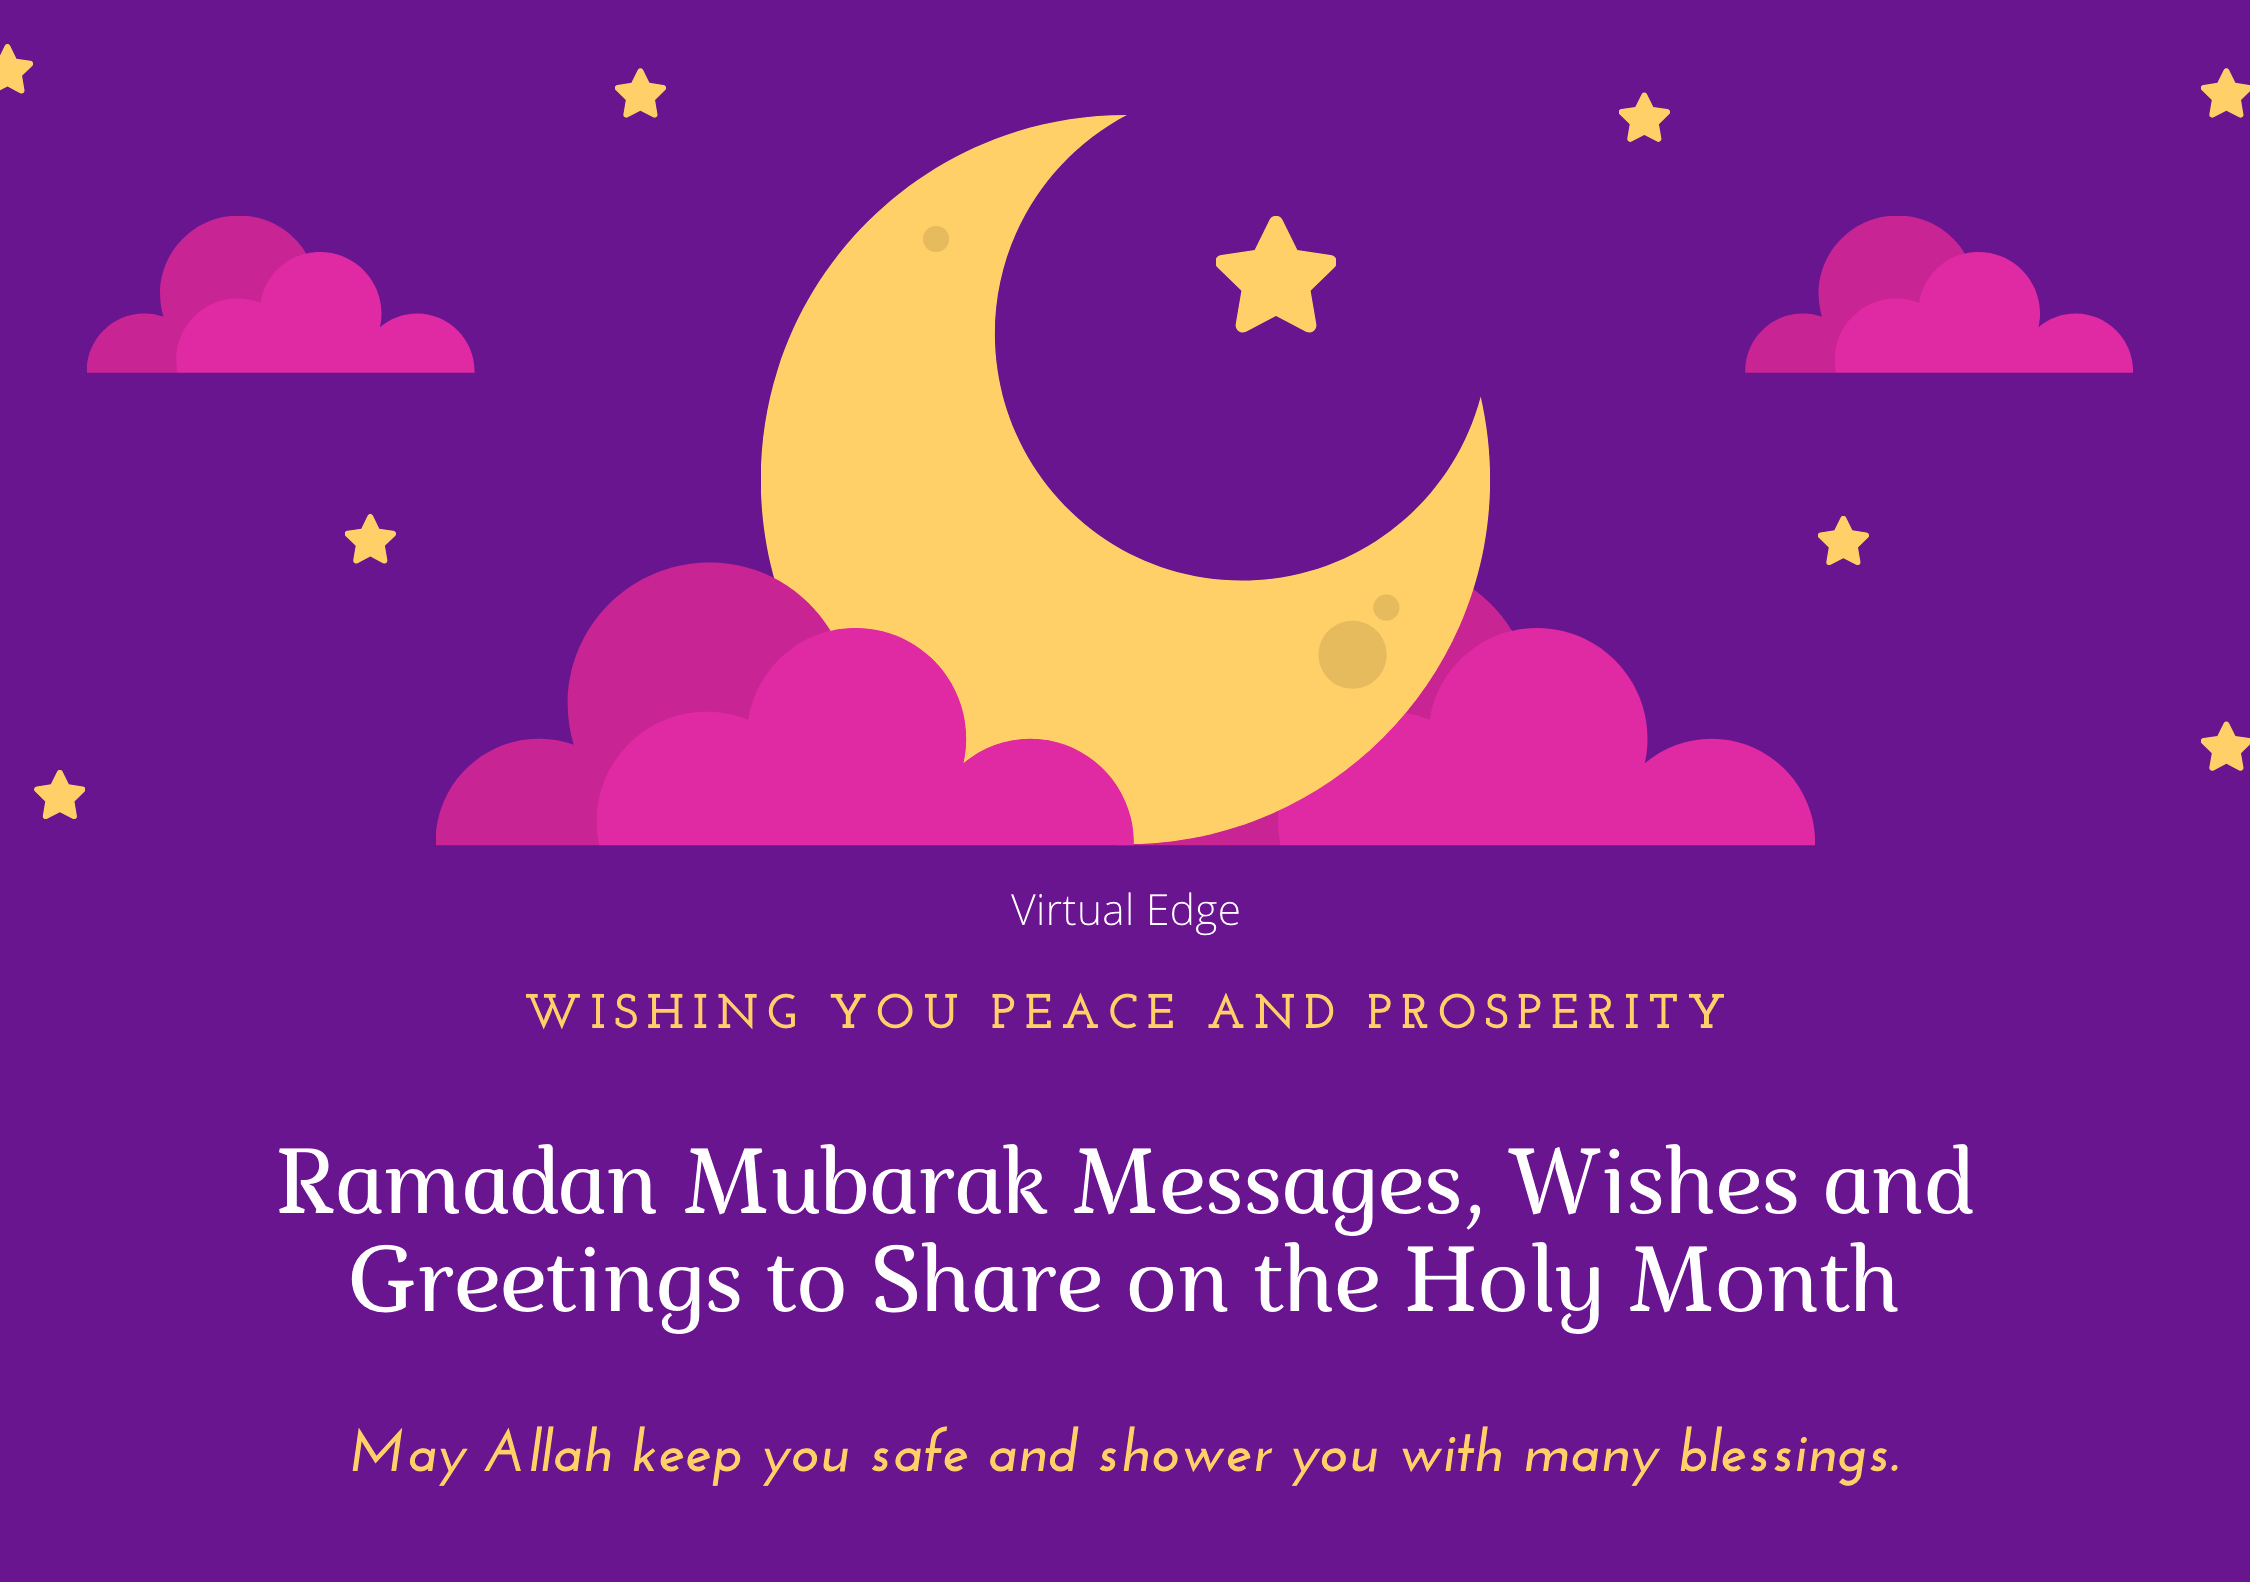 Ramadan Mubarak Messages, Wishes and Greetings to Share on the Holy Month